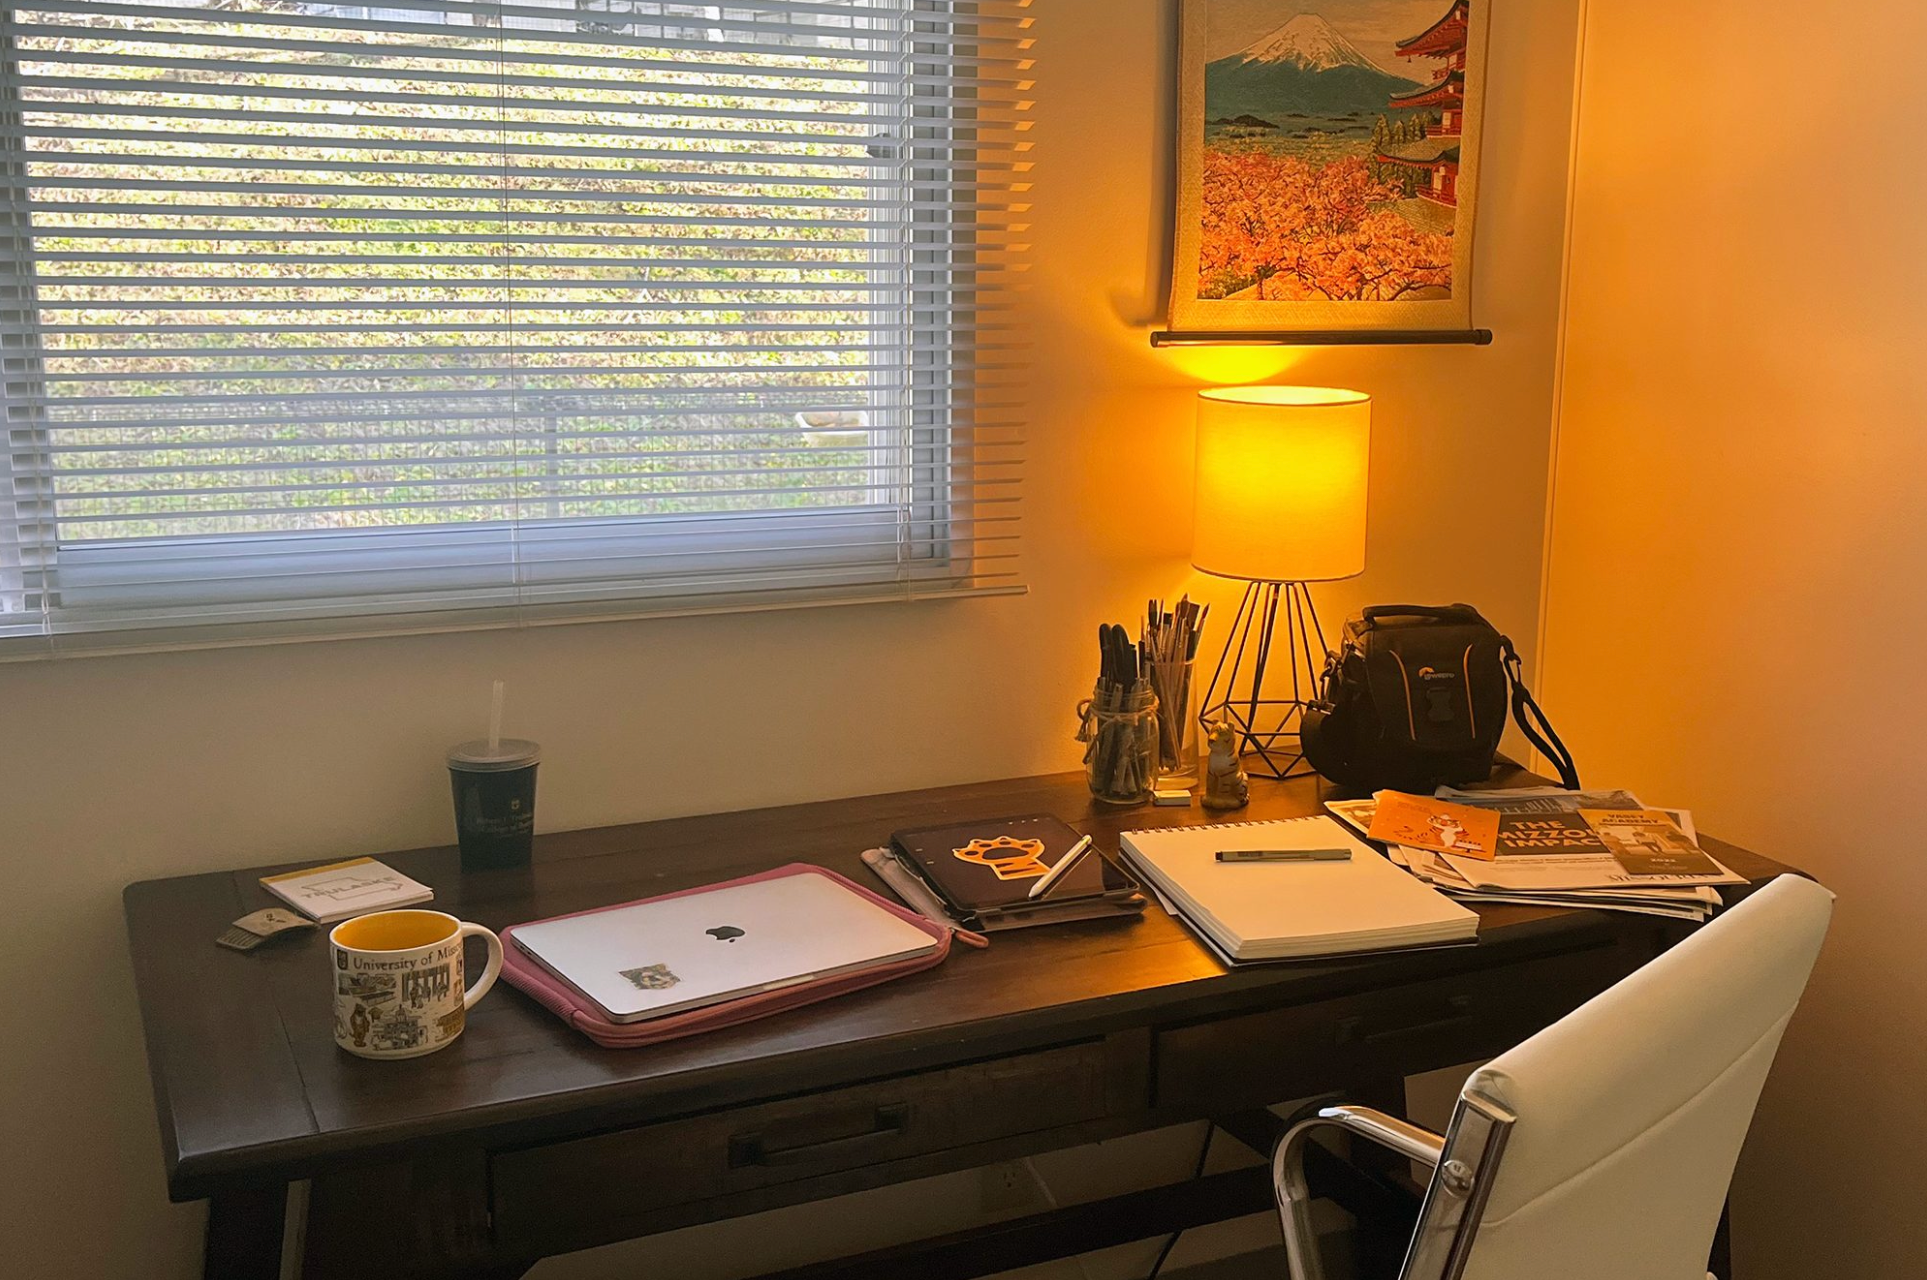 Meridith Howard's desk that she works from home on